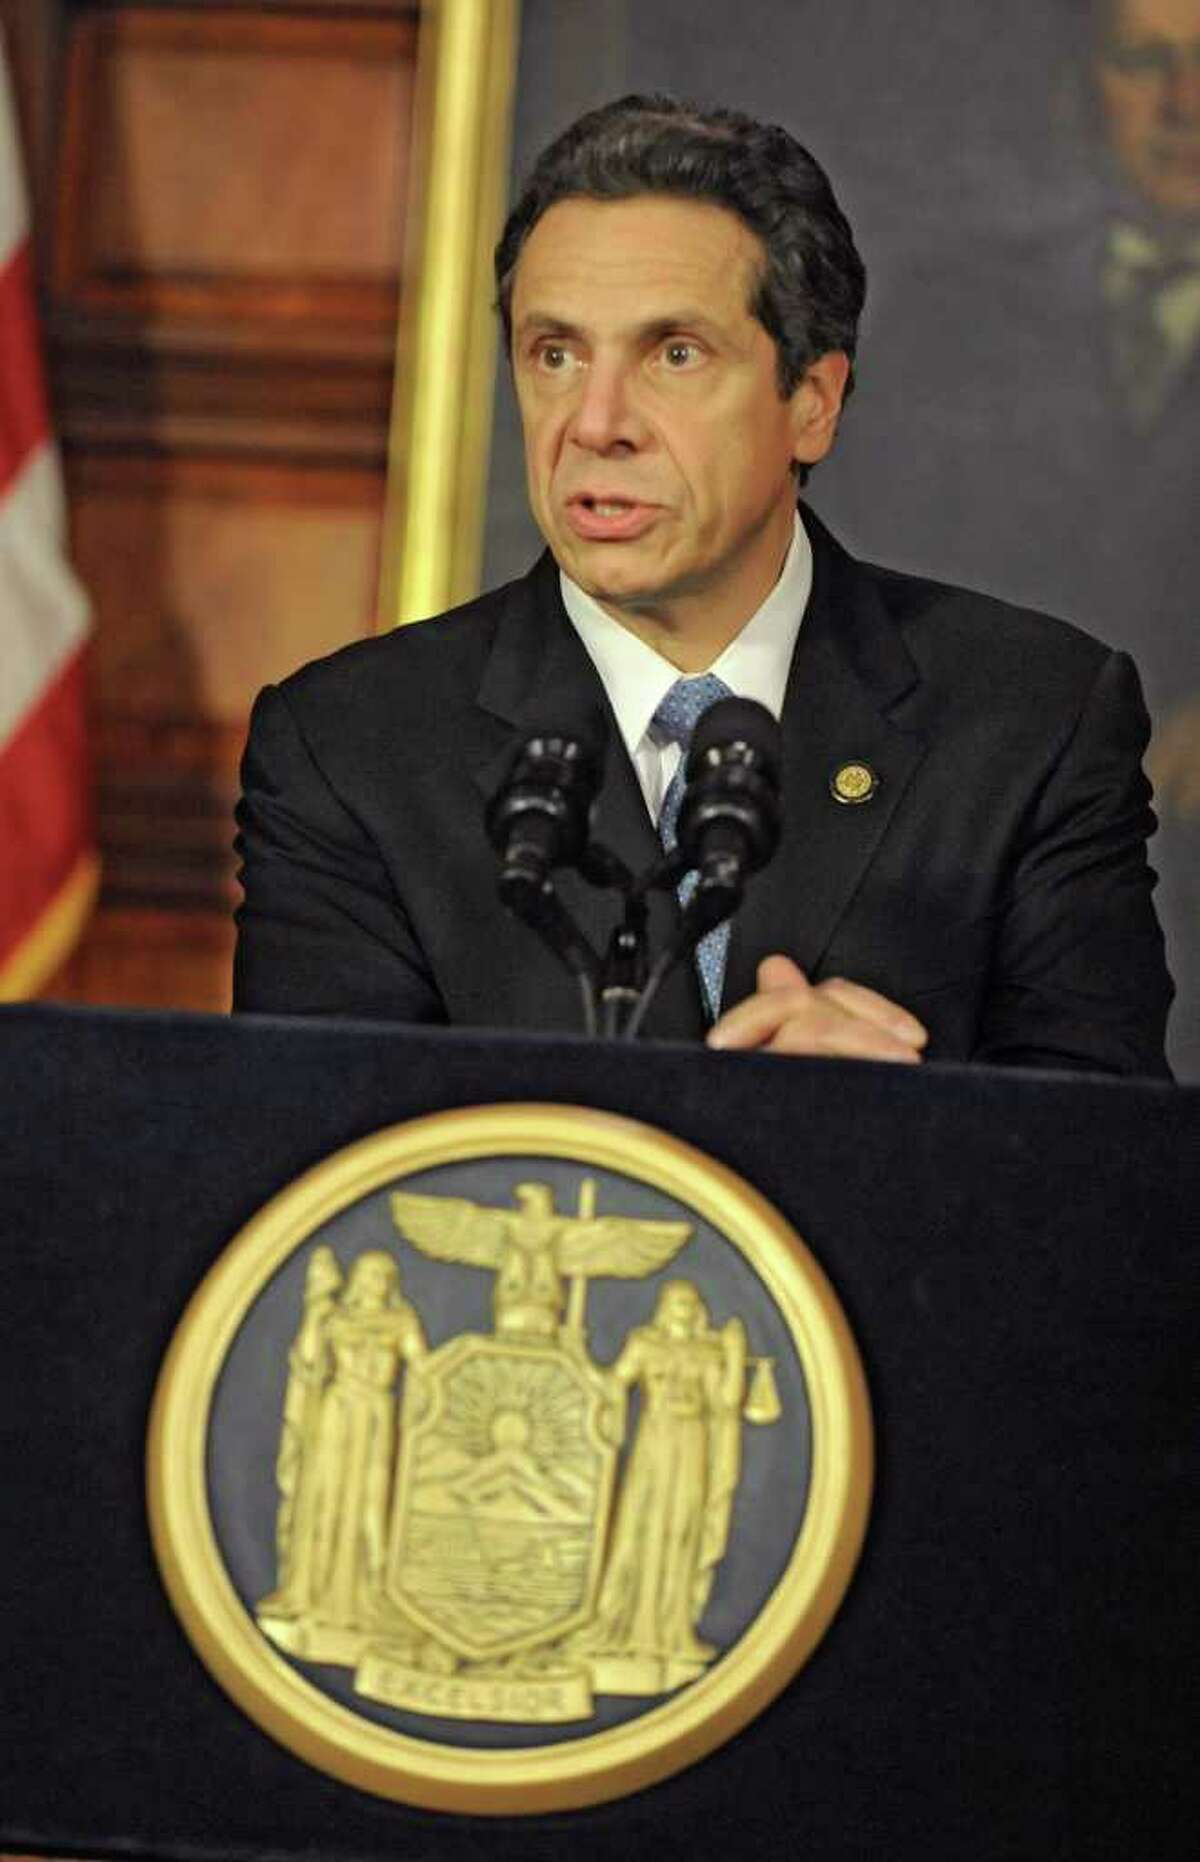 NYS Governor Andrew Cuomo answers questions at a press conference during a special session at the Capitol on Wednesday, Dec. 7, 2011 in Albany, N.Y. (Lori Van Buren / Times Union)